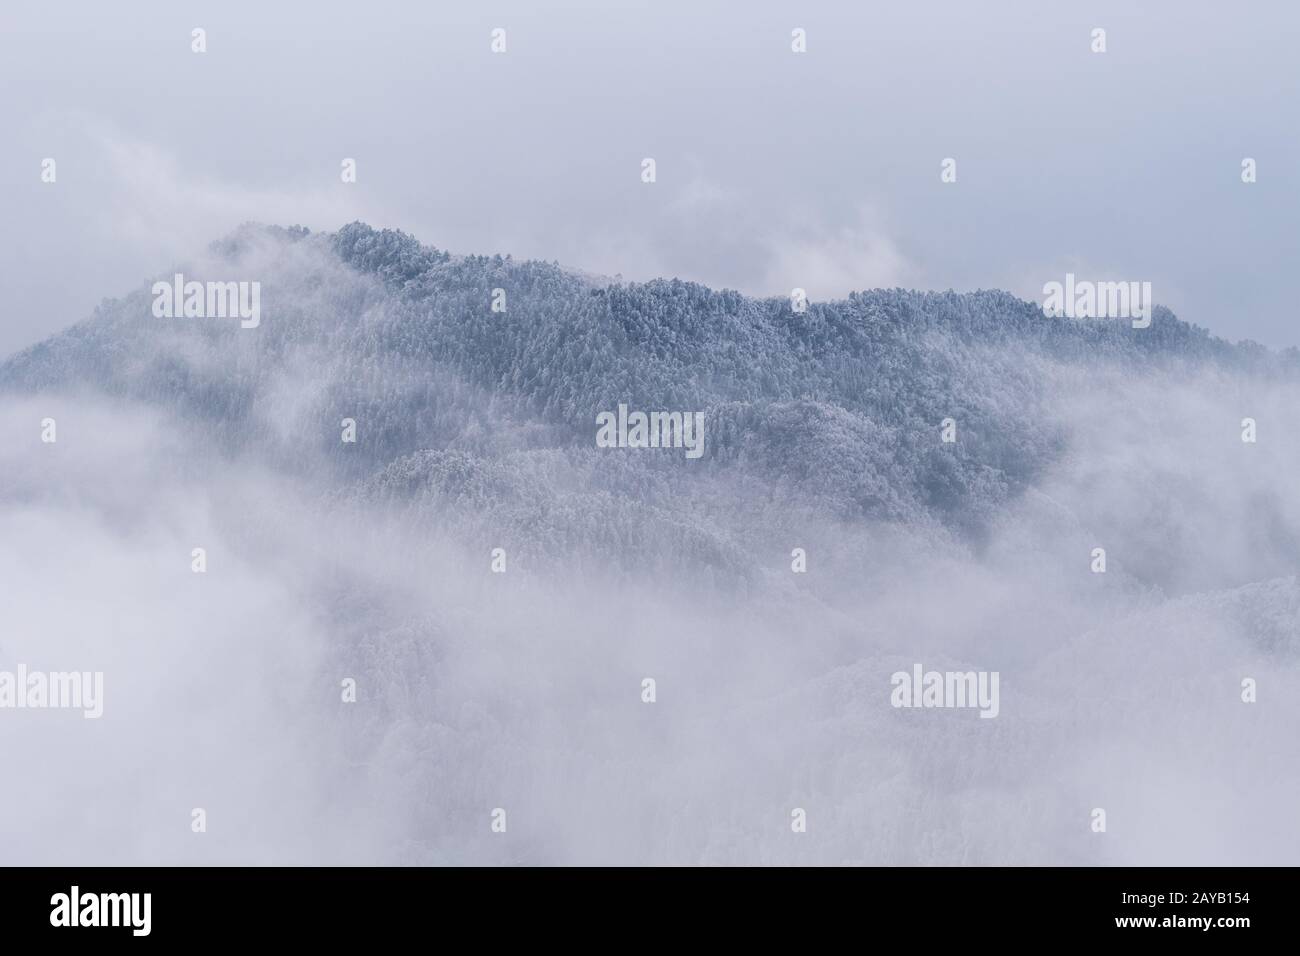 winter background in mountains Stock Photo